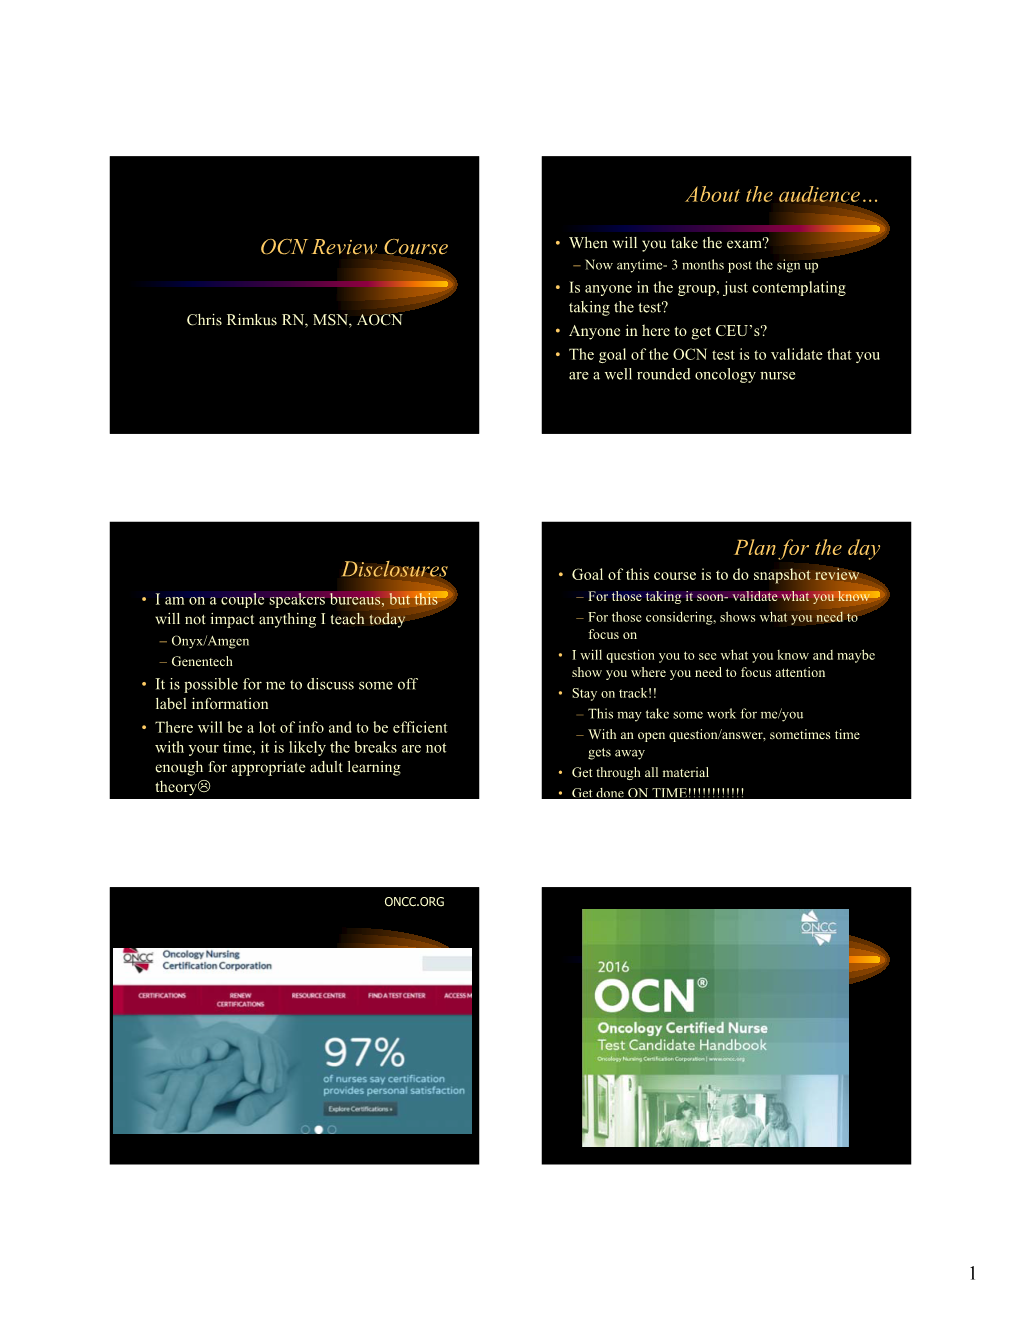 OCN Review Course About the Audience… Disclosures Plan for The